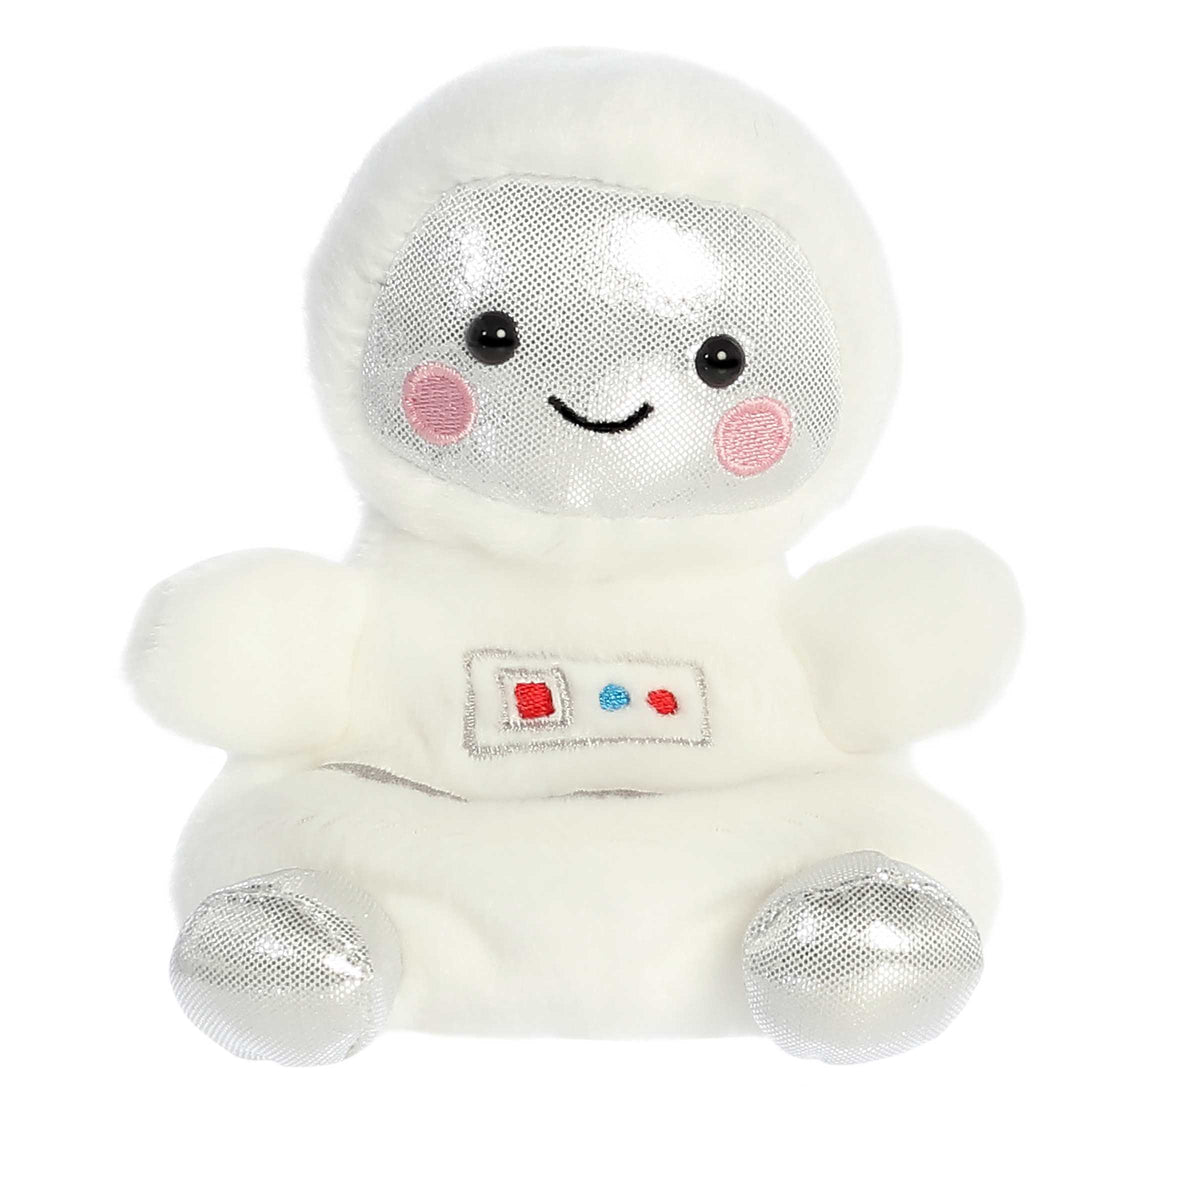 Cute mini Astronaut plush toy with soft white body, shiny silver accents on face and legs, and smiling face with pink accent